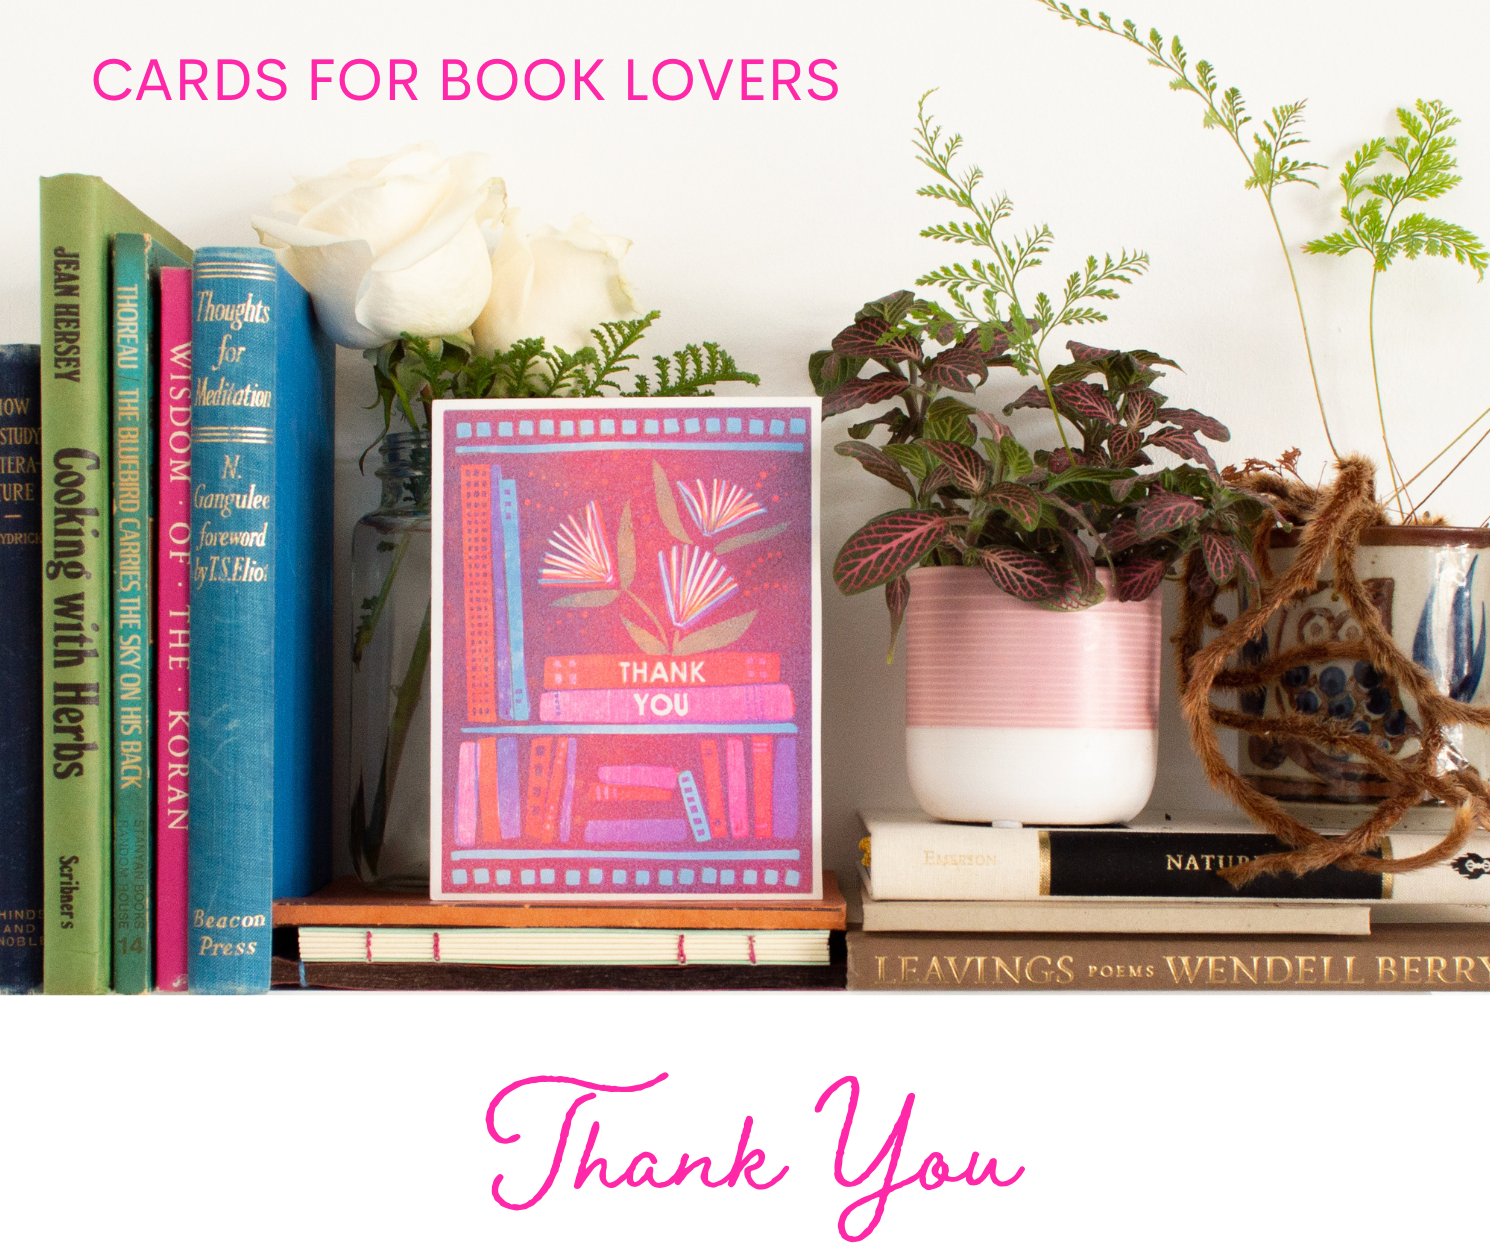 Cards for Book Lovers